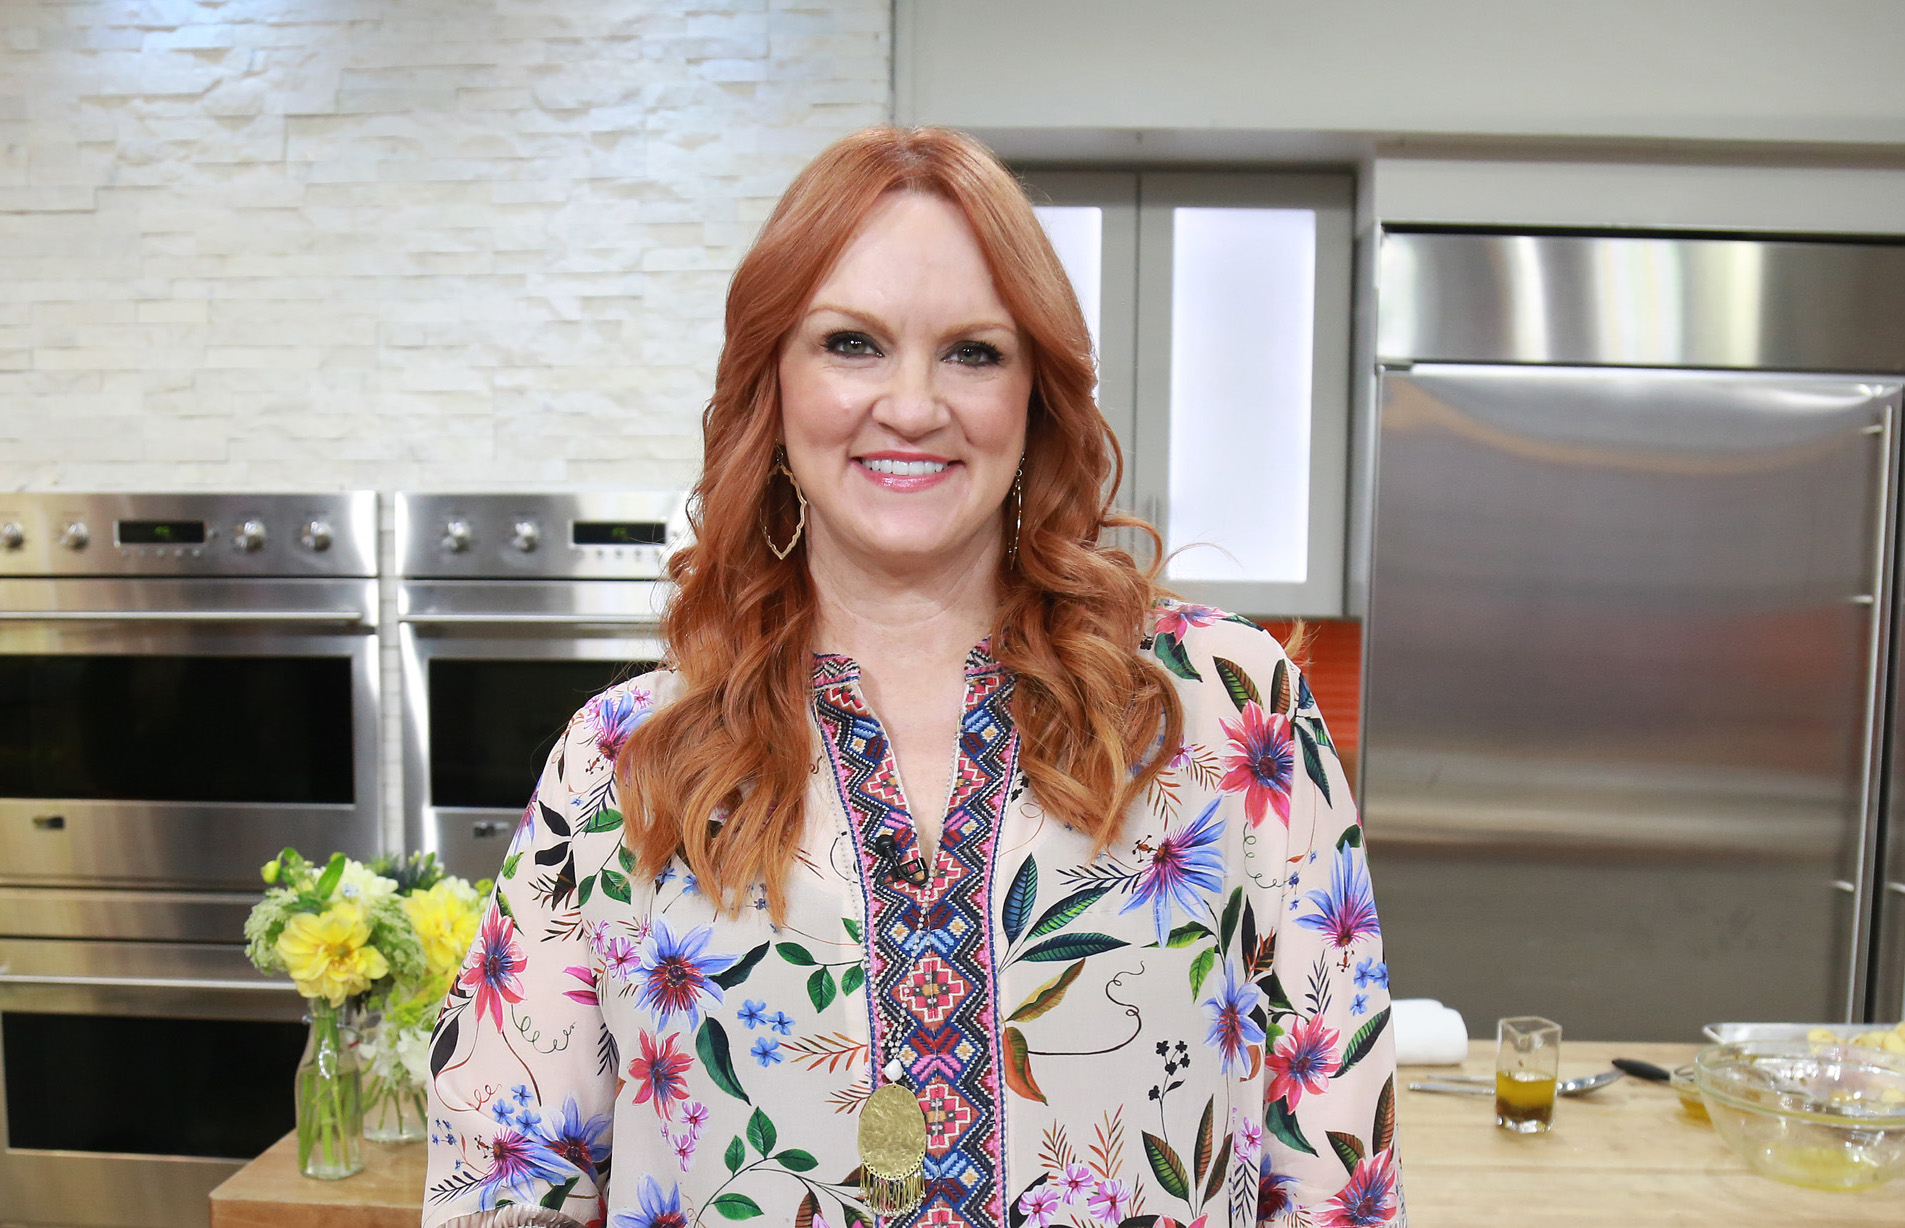 Ree Drummond Details 55-Lb Weight Loss: Before and After Pics